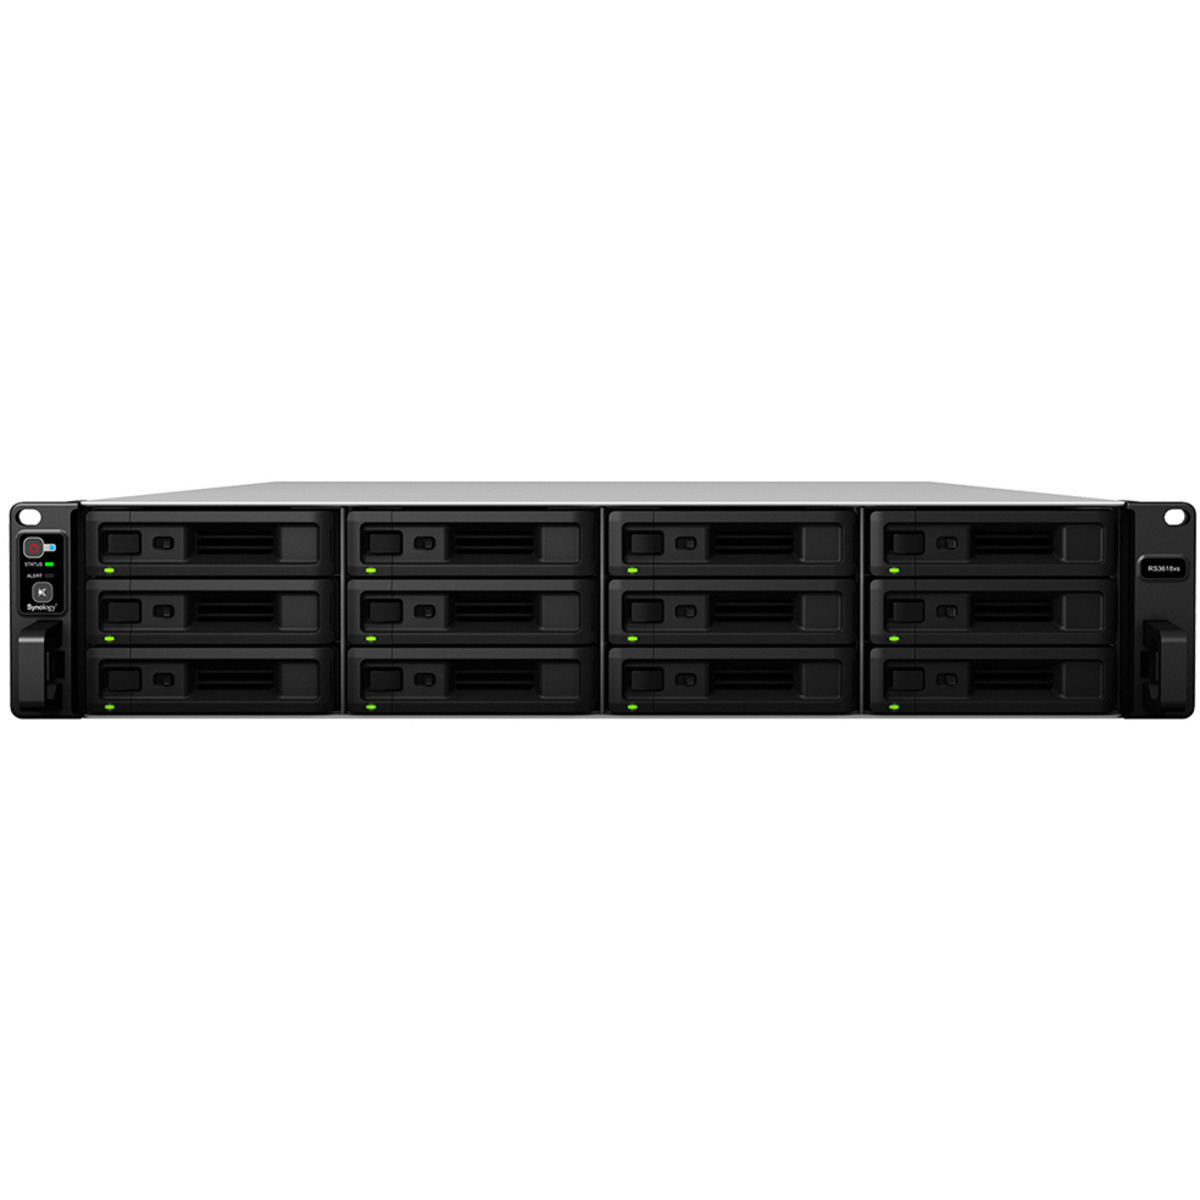 Synology RackStation RS3618xs 54tb 12-Bay RackMount Large Business / Enterprise NAS - Network Attached Storage Device 9x6tb Western Digital Red Pro WD6003FFBX 3.5 7200rpm SATA 6Gb/s HDD NAS Class Drives Installed - Burn-In Tested RackStation RS3618xs